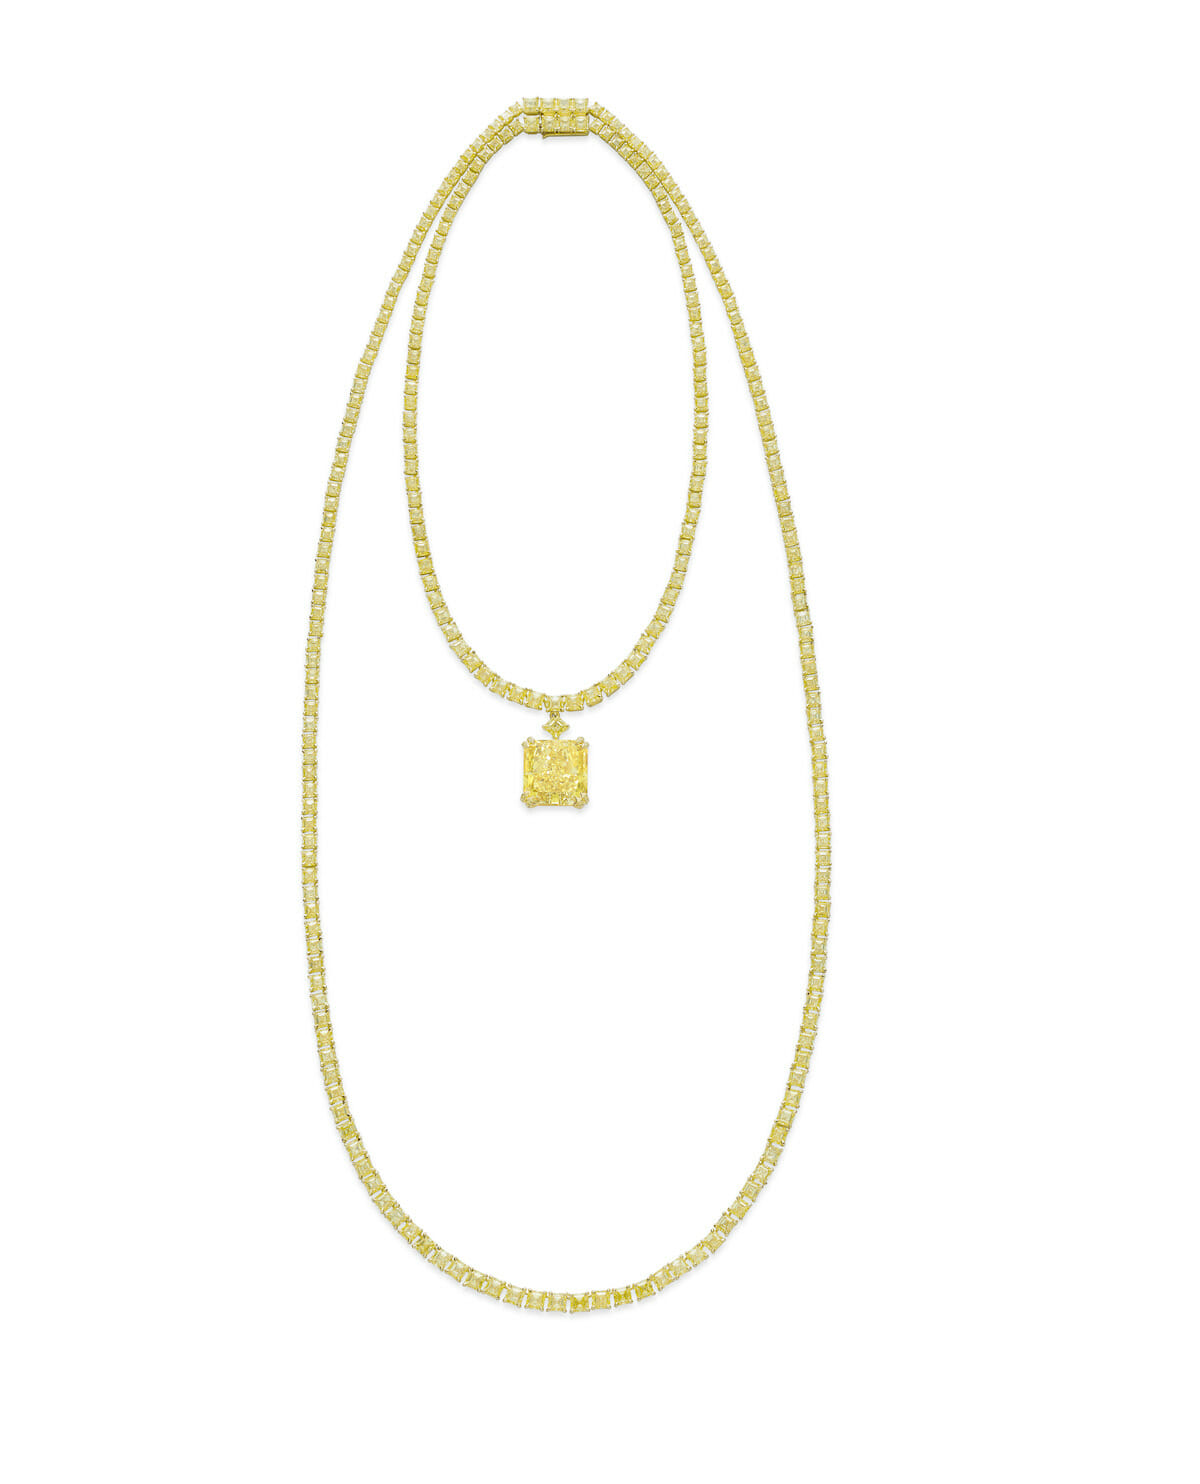 Chopard Red Carpet Collection Necklace